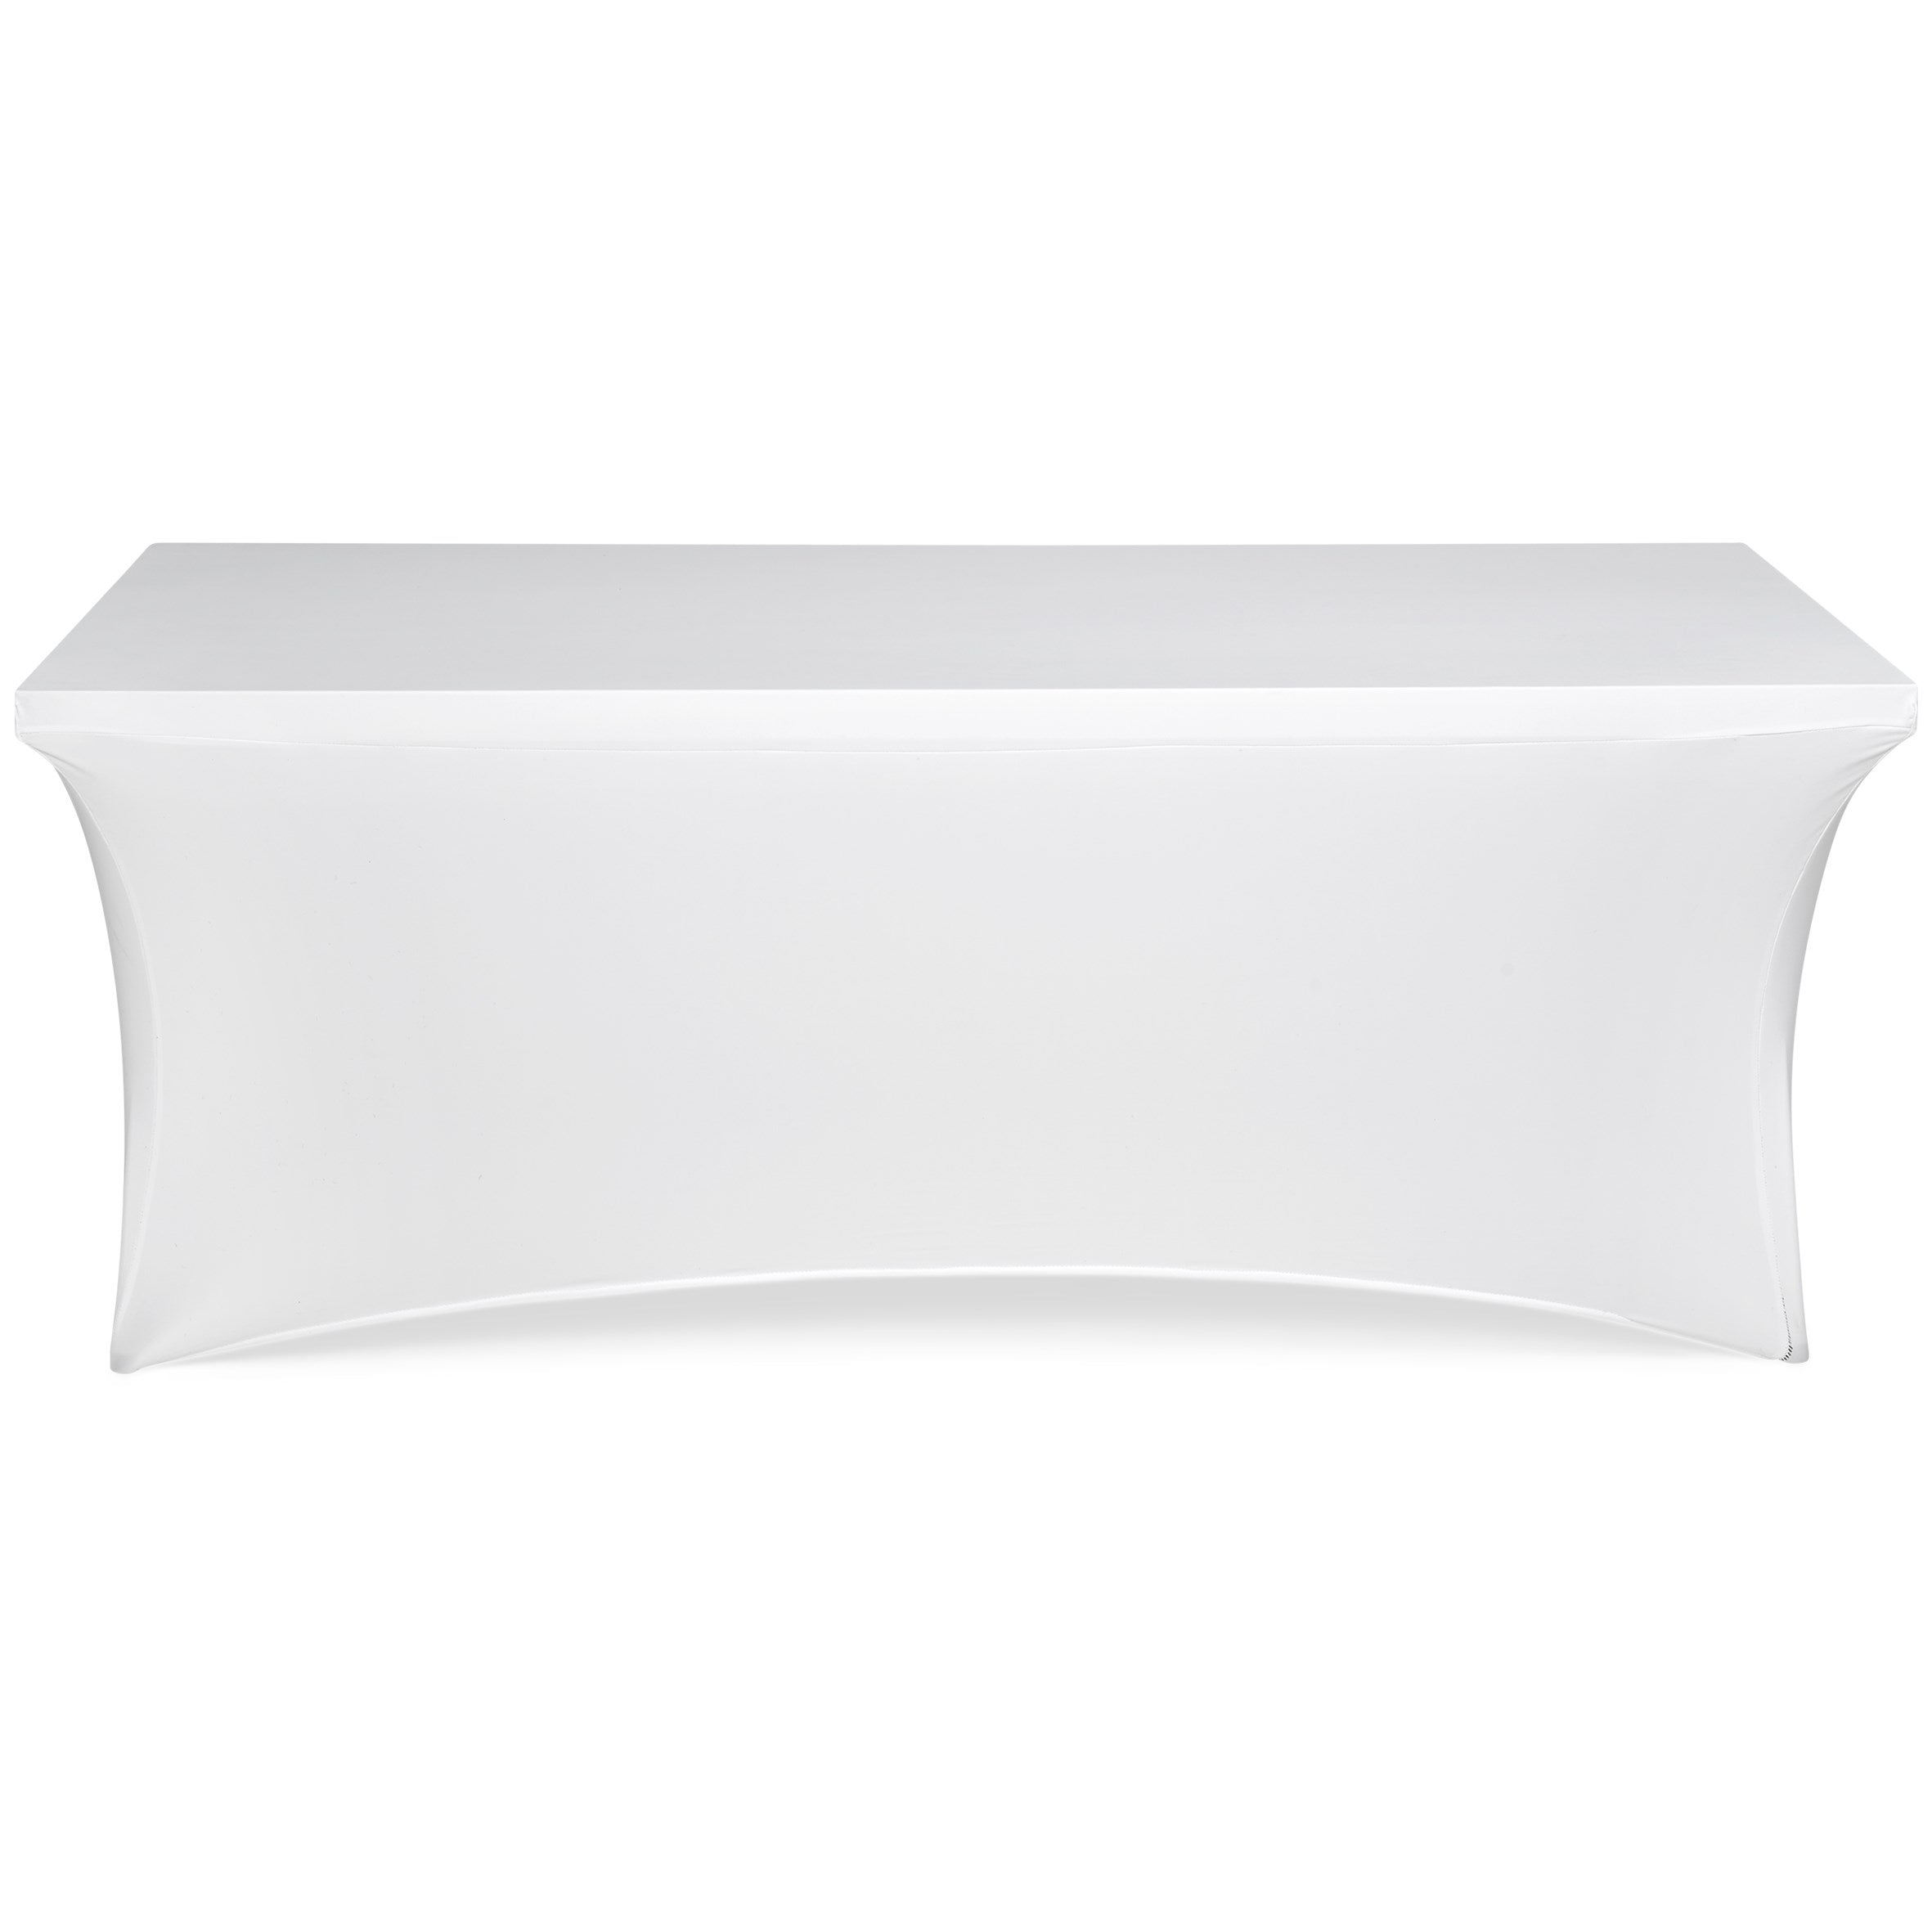 Ovation Spandex Stretch Slip-Over Tablecloth - Banners